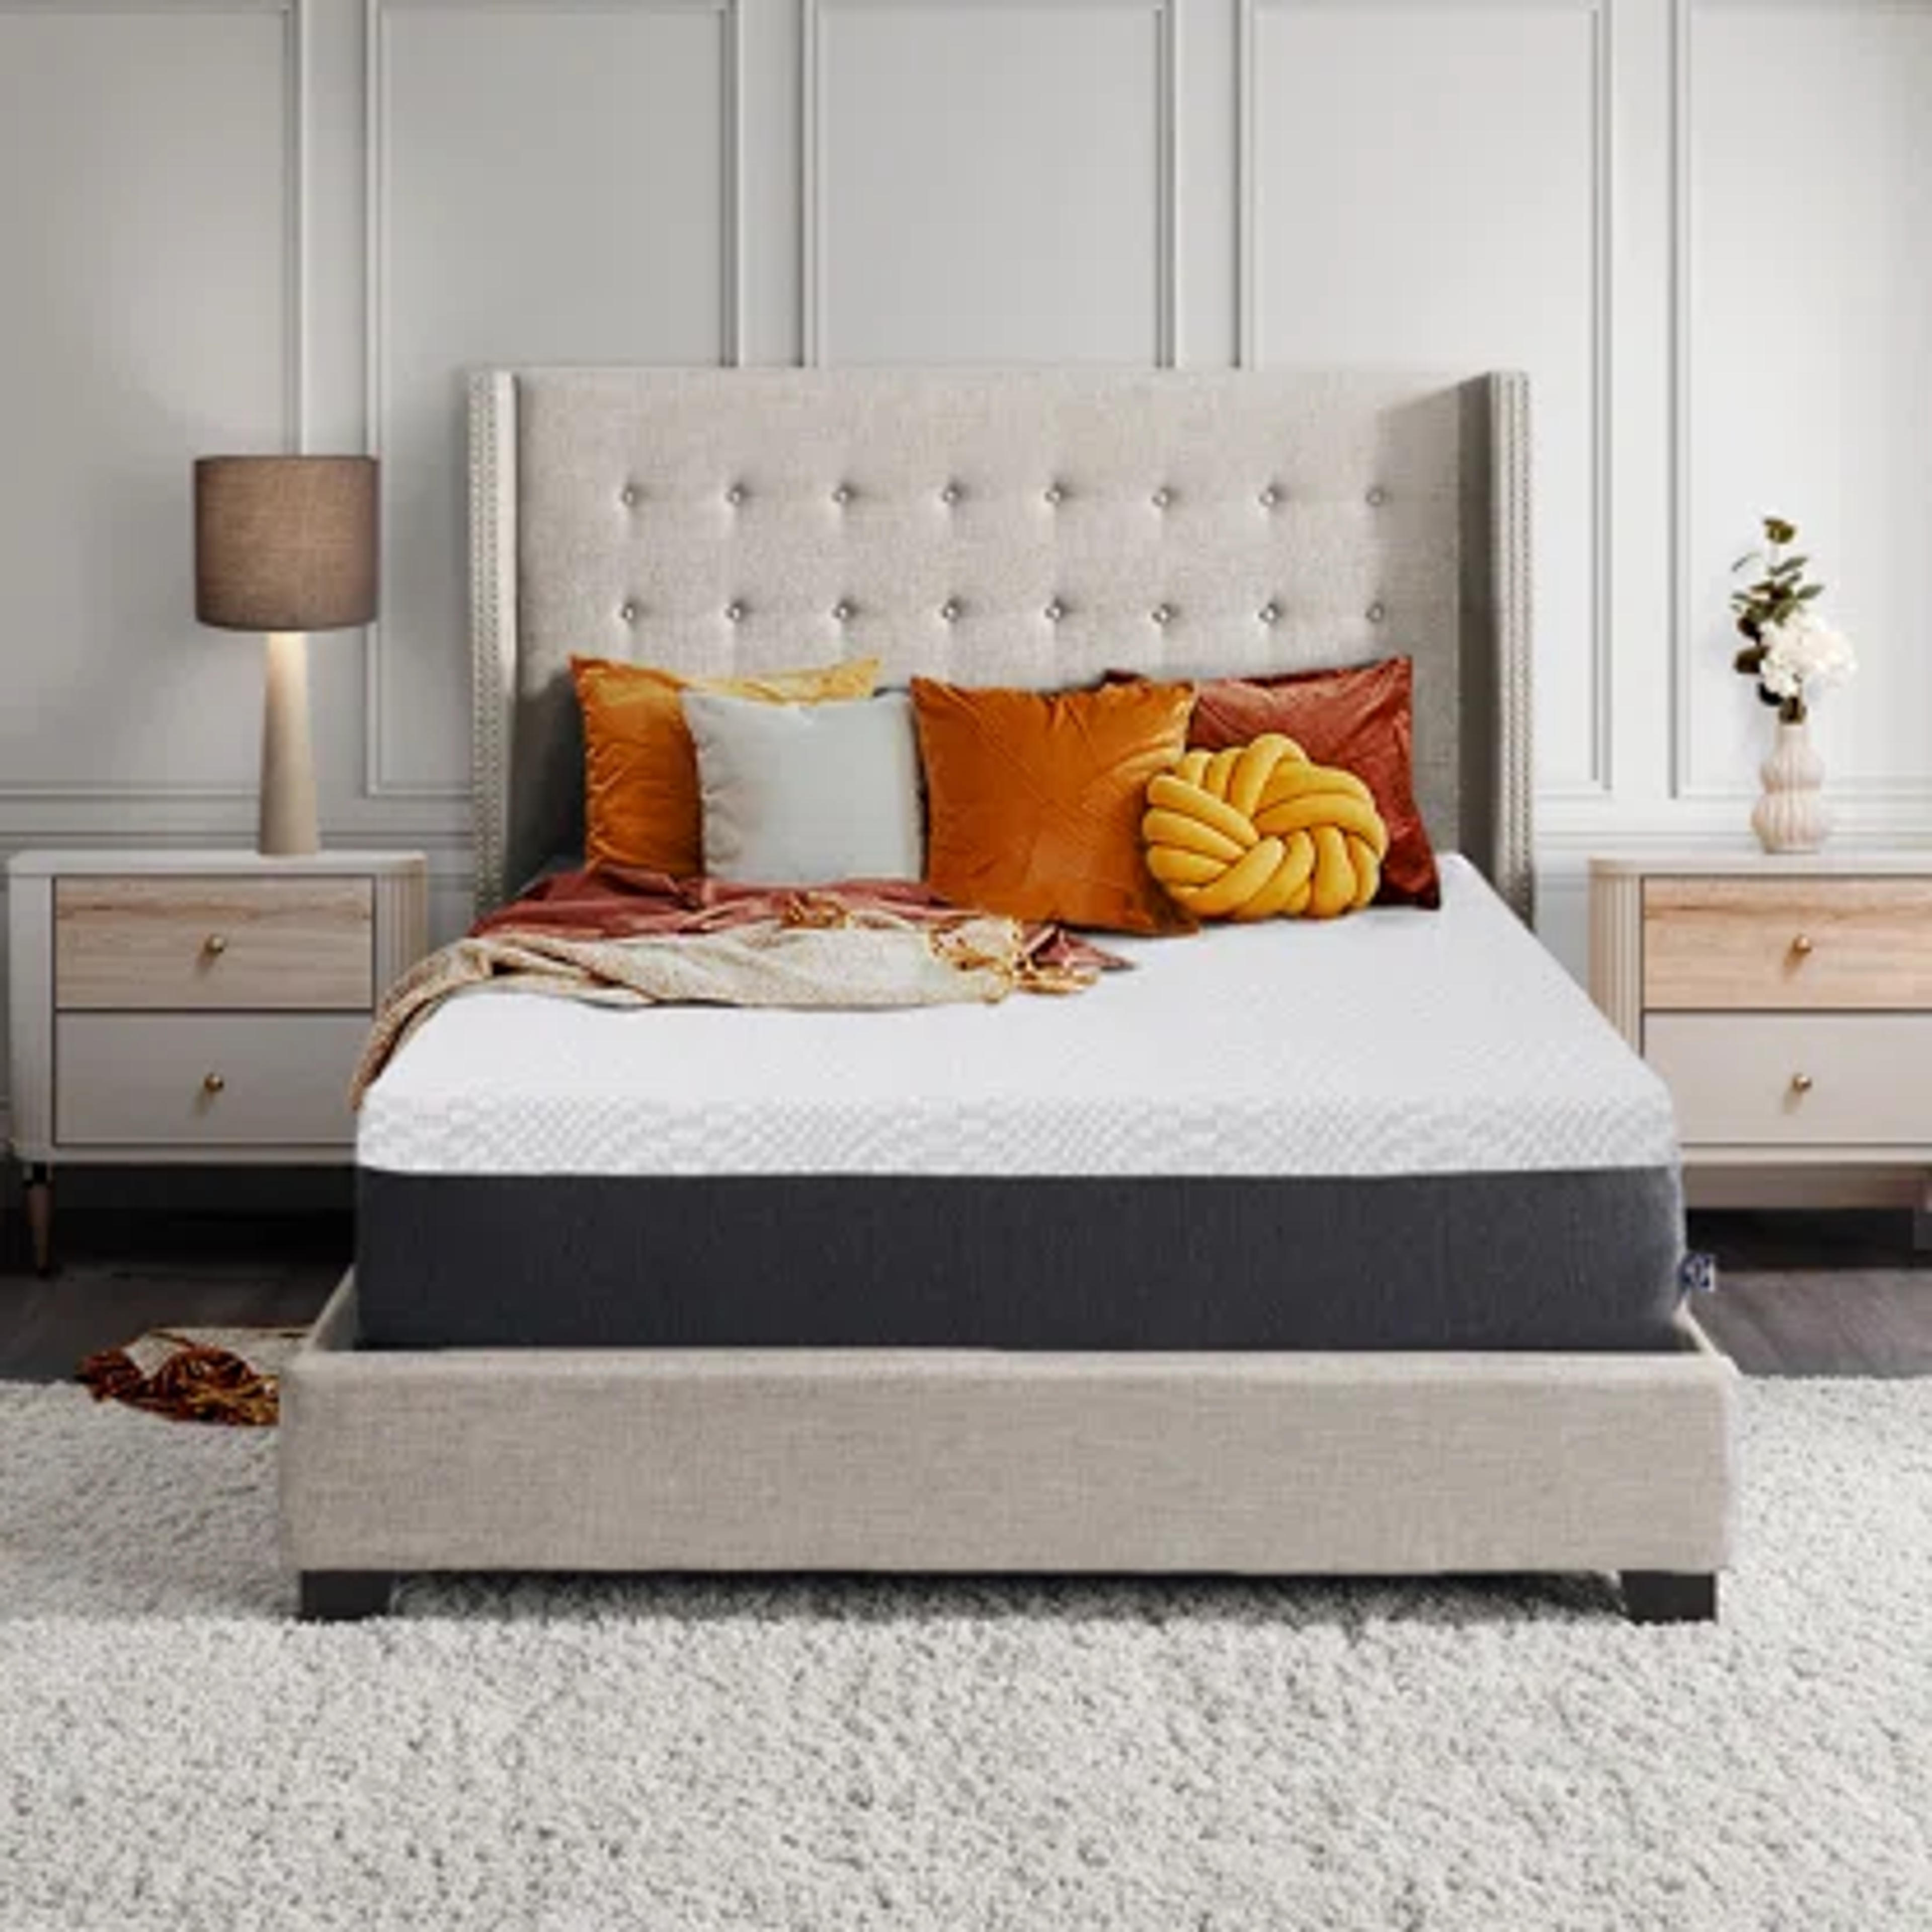 Mattresses & more - up to 60% off